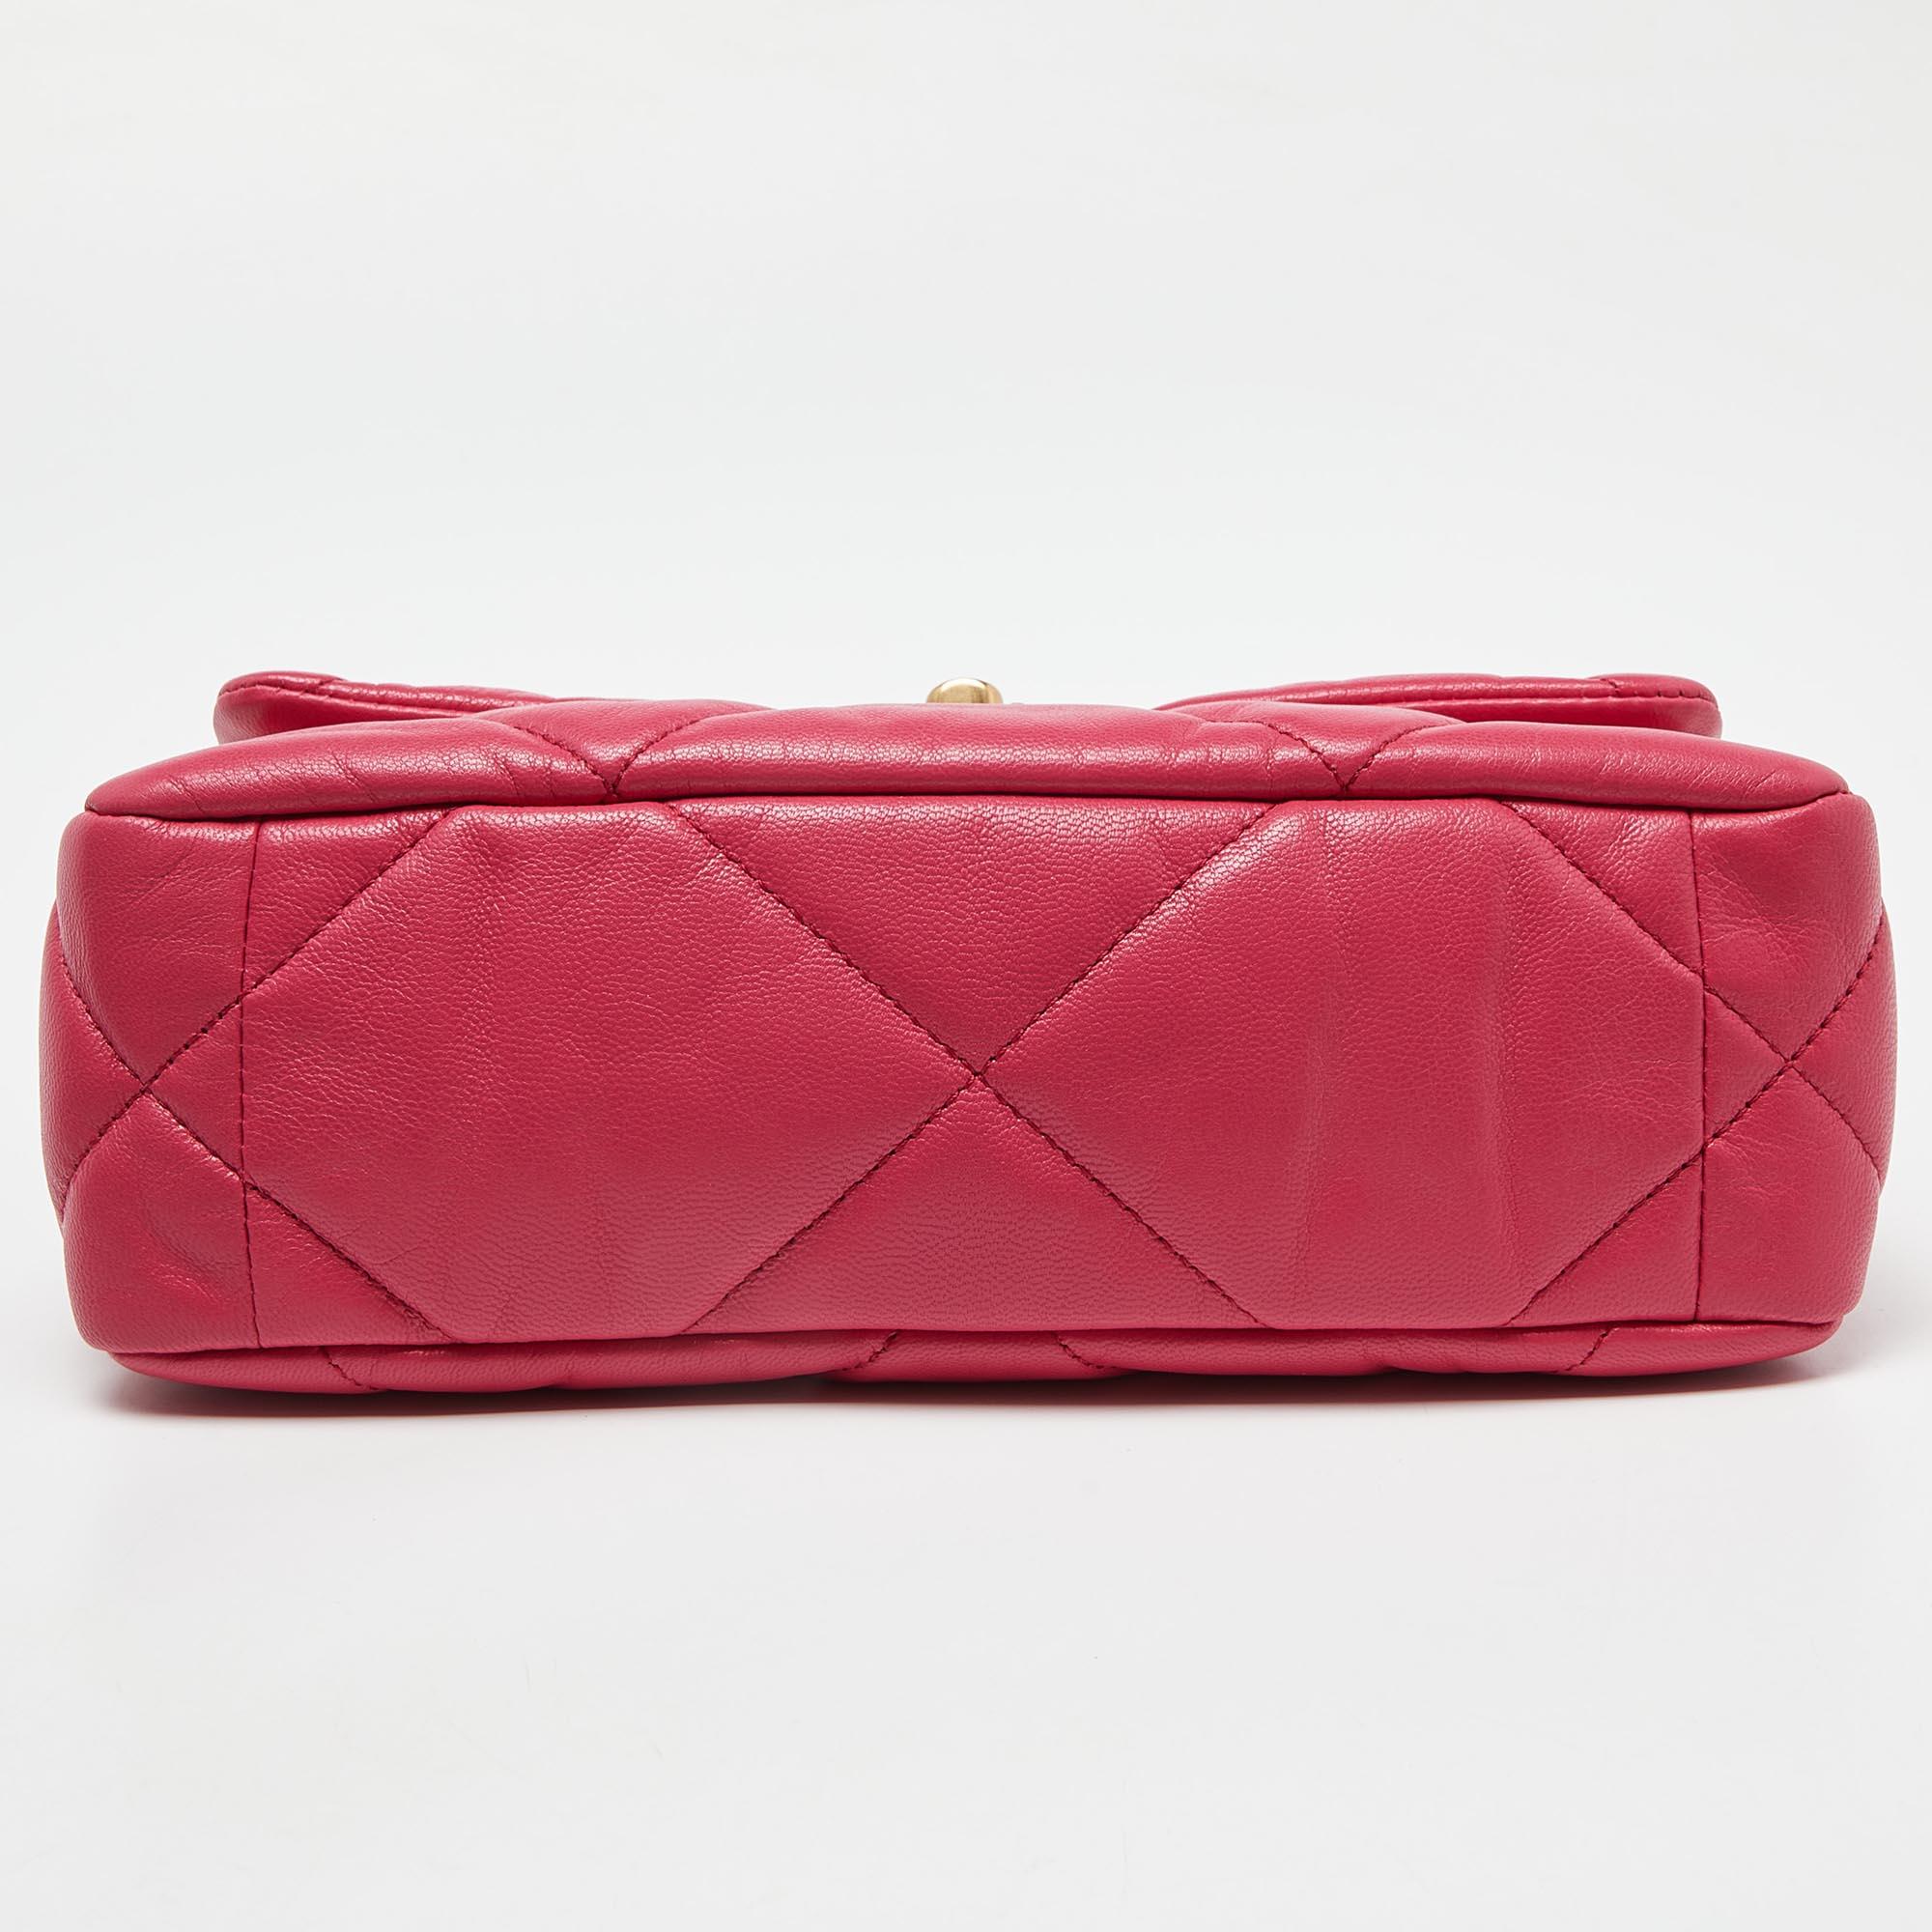 Chanel Pink Quilted Leather Medium 19 Flap Top Handle Bag For Sale 1